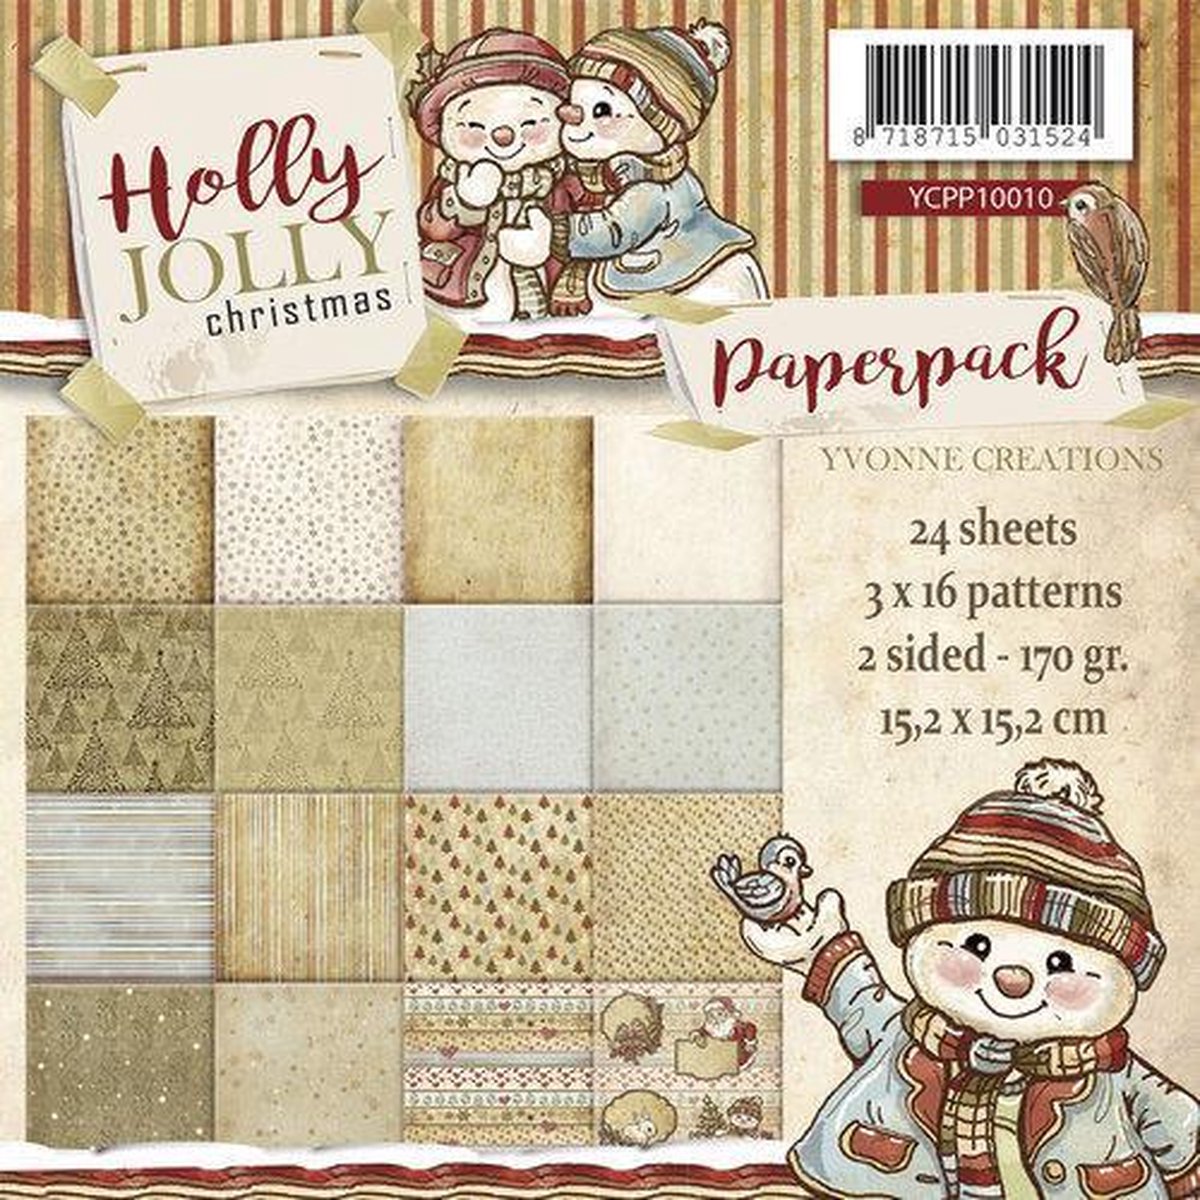 Paperpack - Yvonne Creations - Holly Jolly